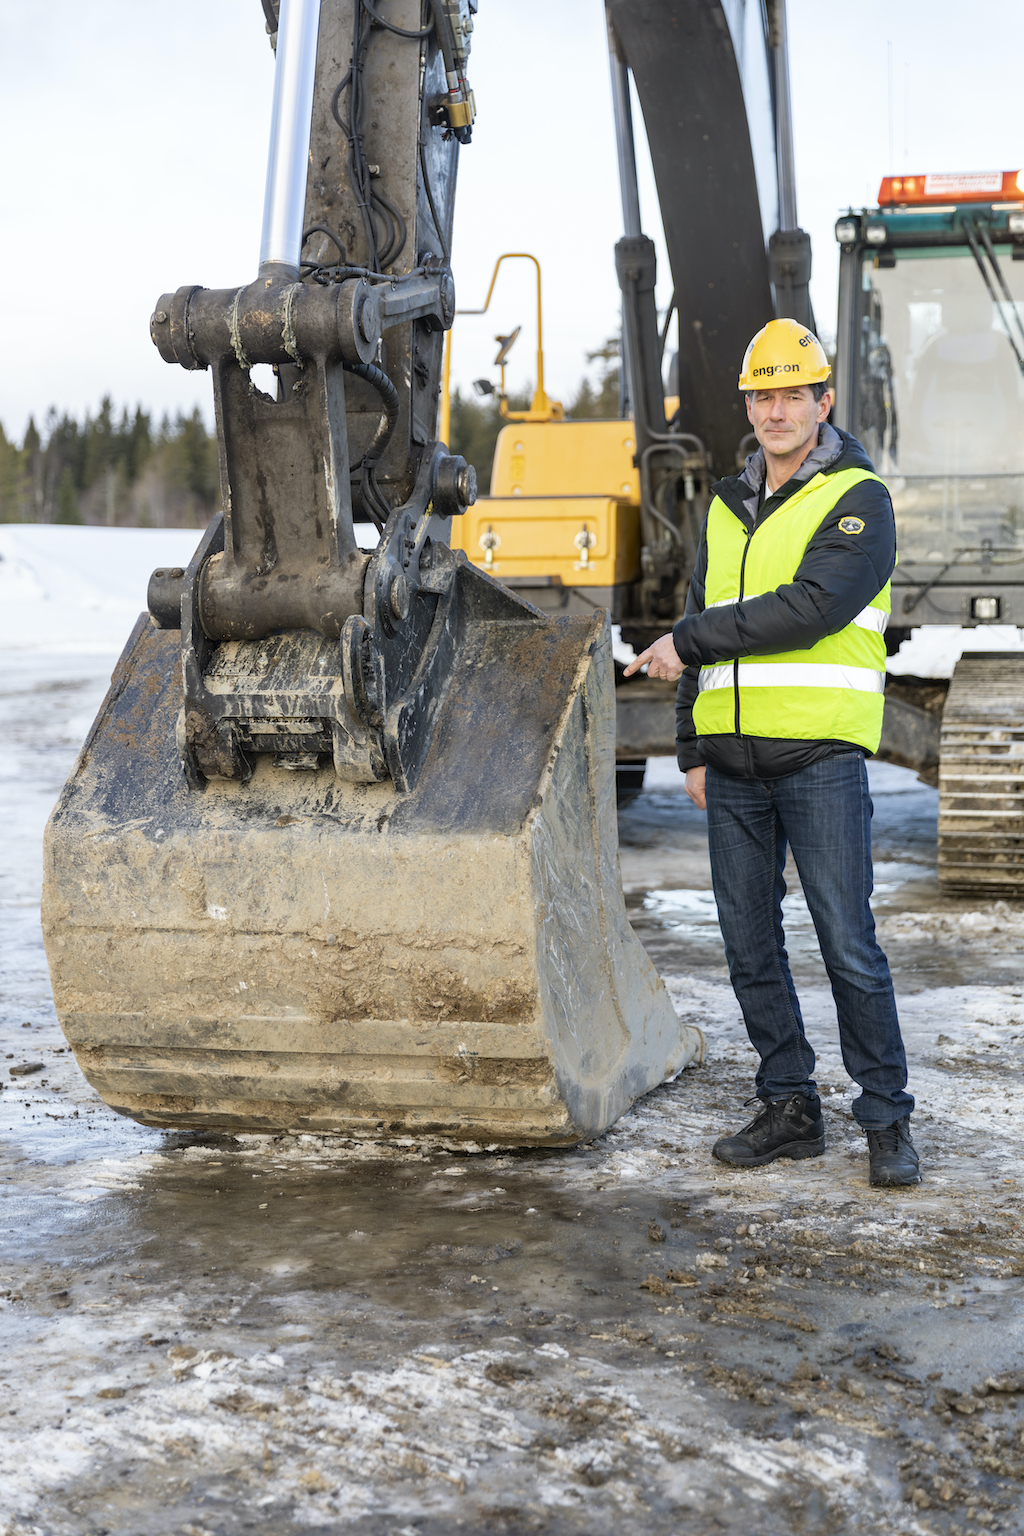 Engcon | Safety must be made a top priority!